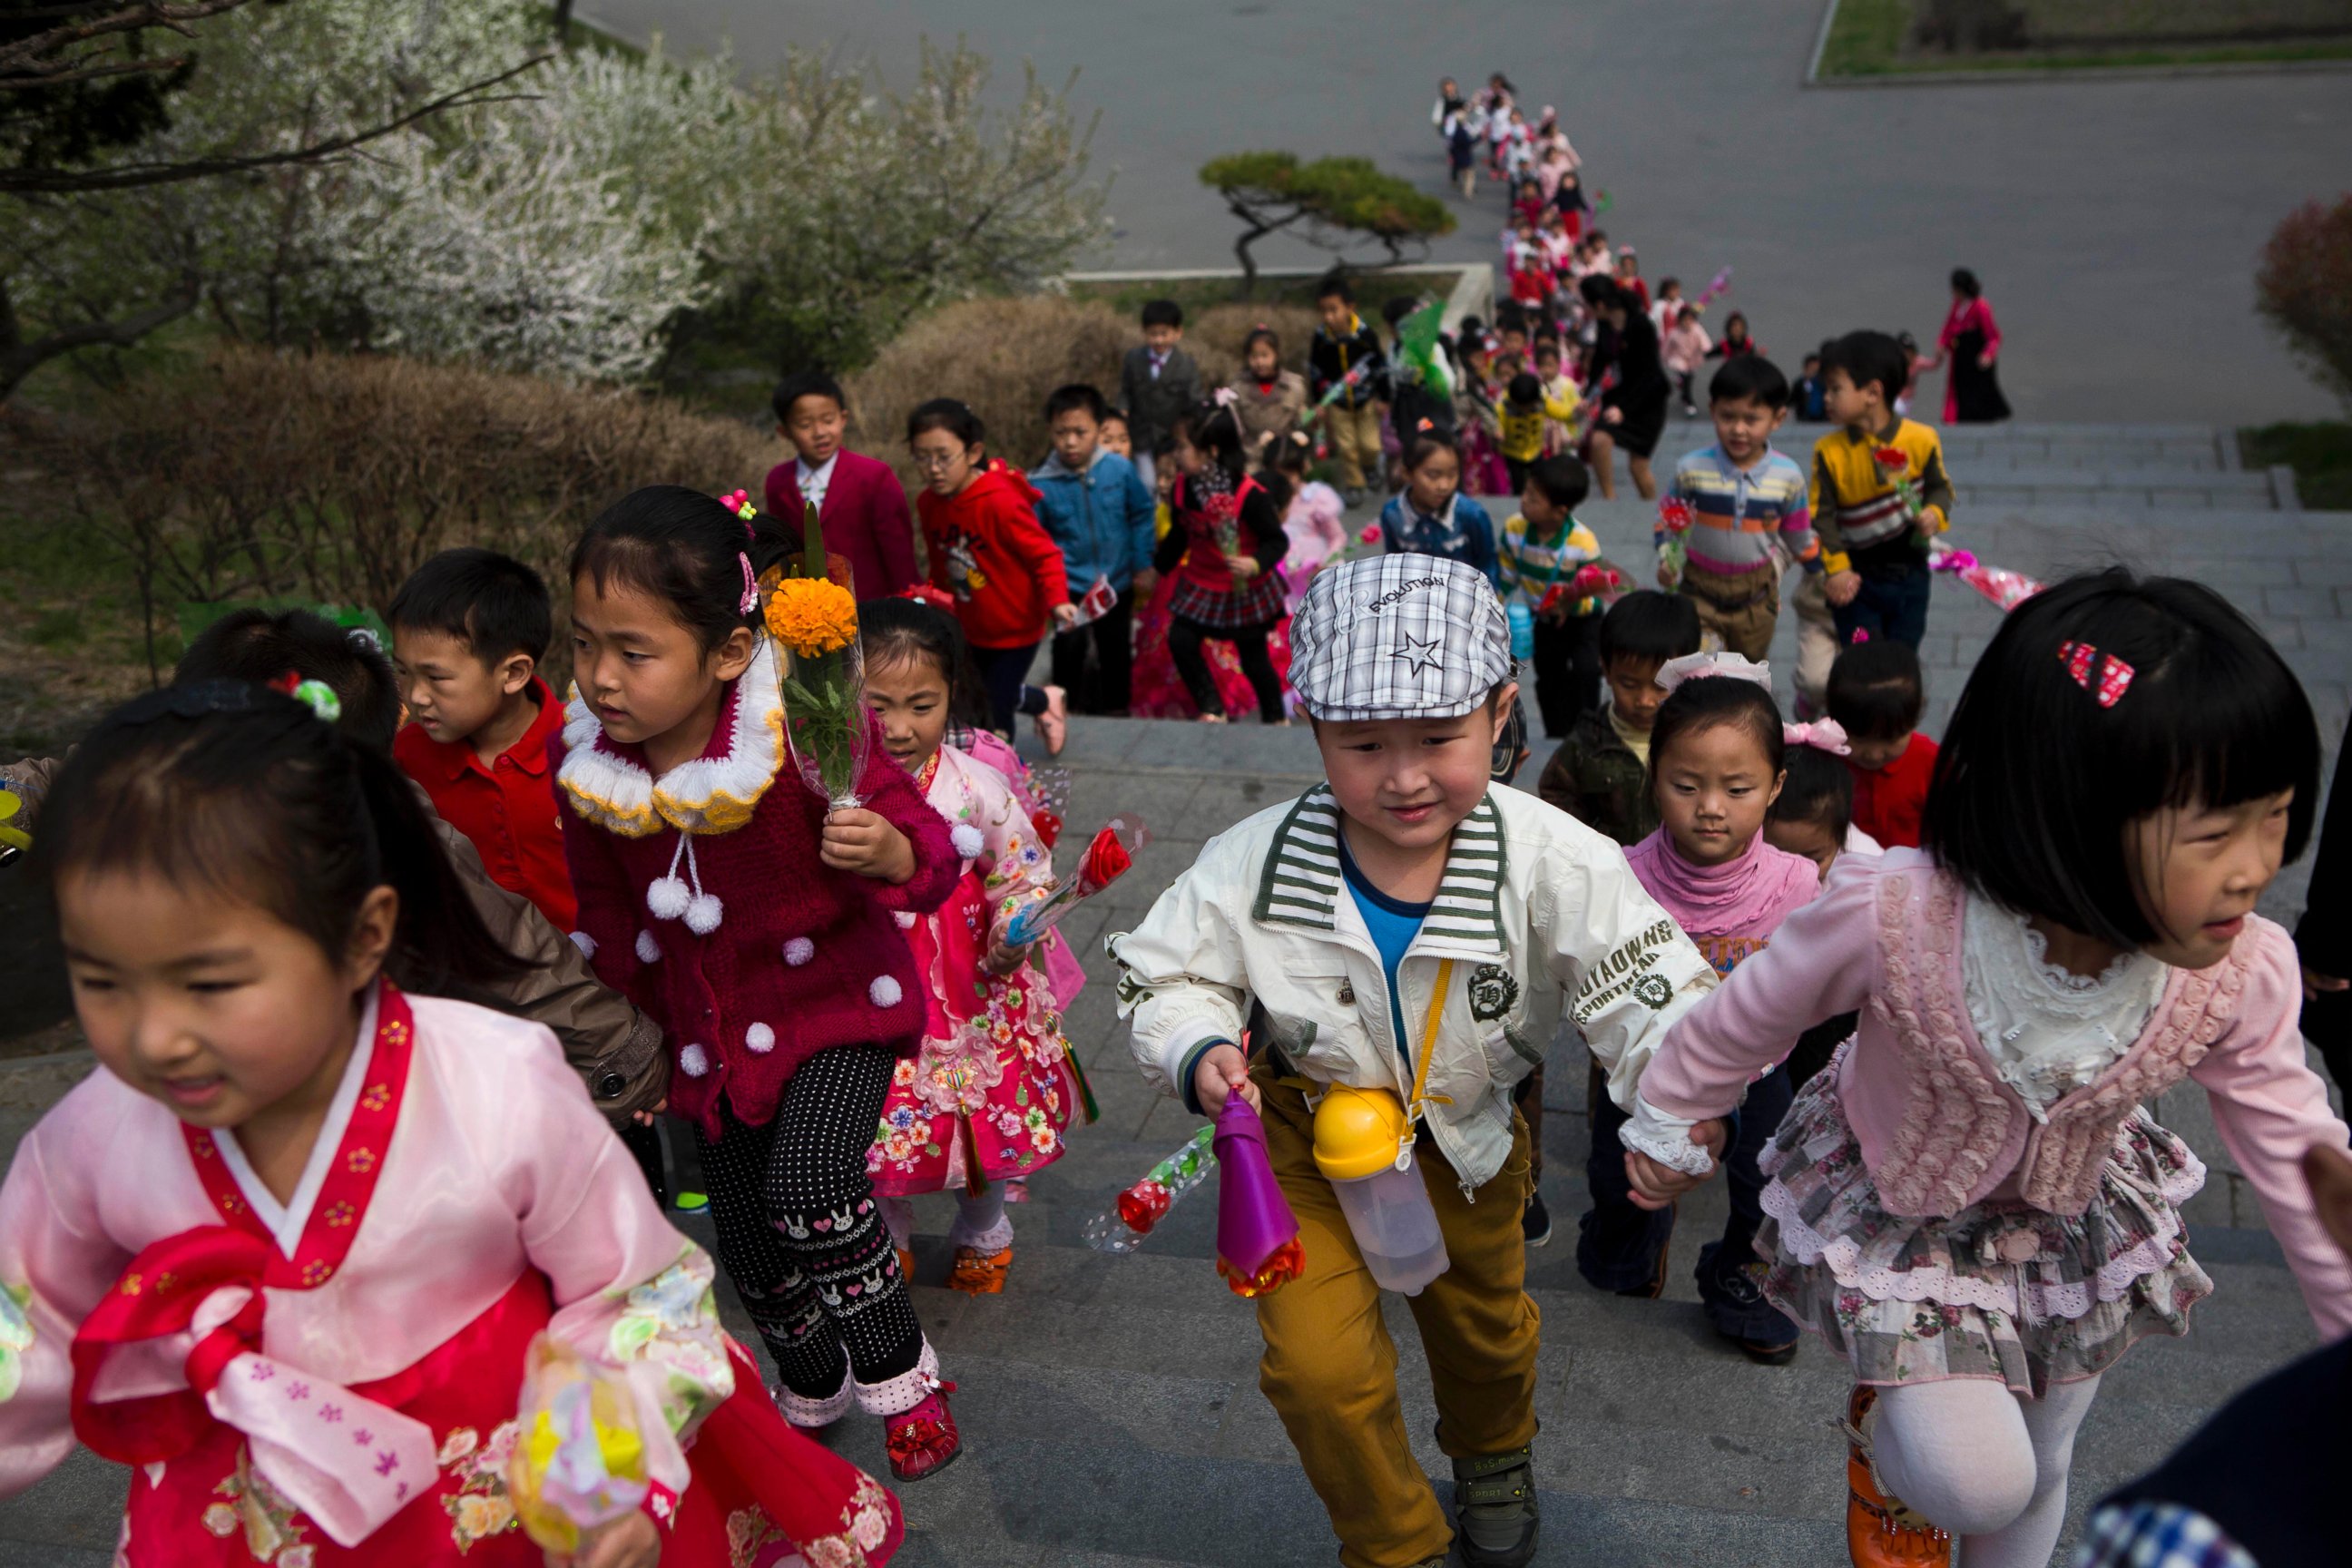 PHOTO: North Korean children climb steps near Mansu Hill on their way to lay flowers at the feet of bronze statues of the late North Korean leaders Kim Il Sung and Kim Jong Il in Pyongyang, North Korea on April 12, 2014.